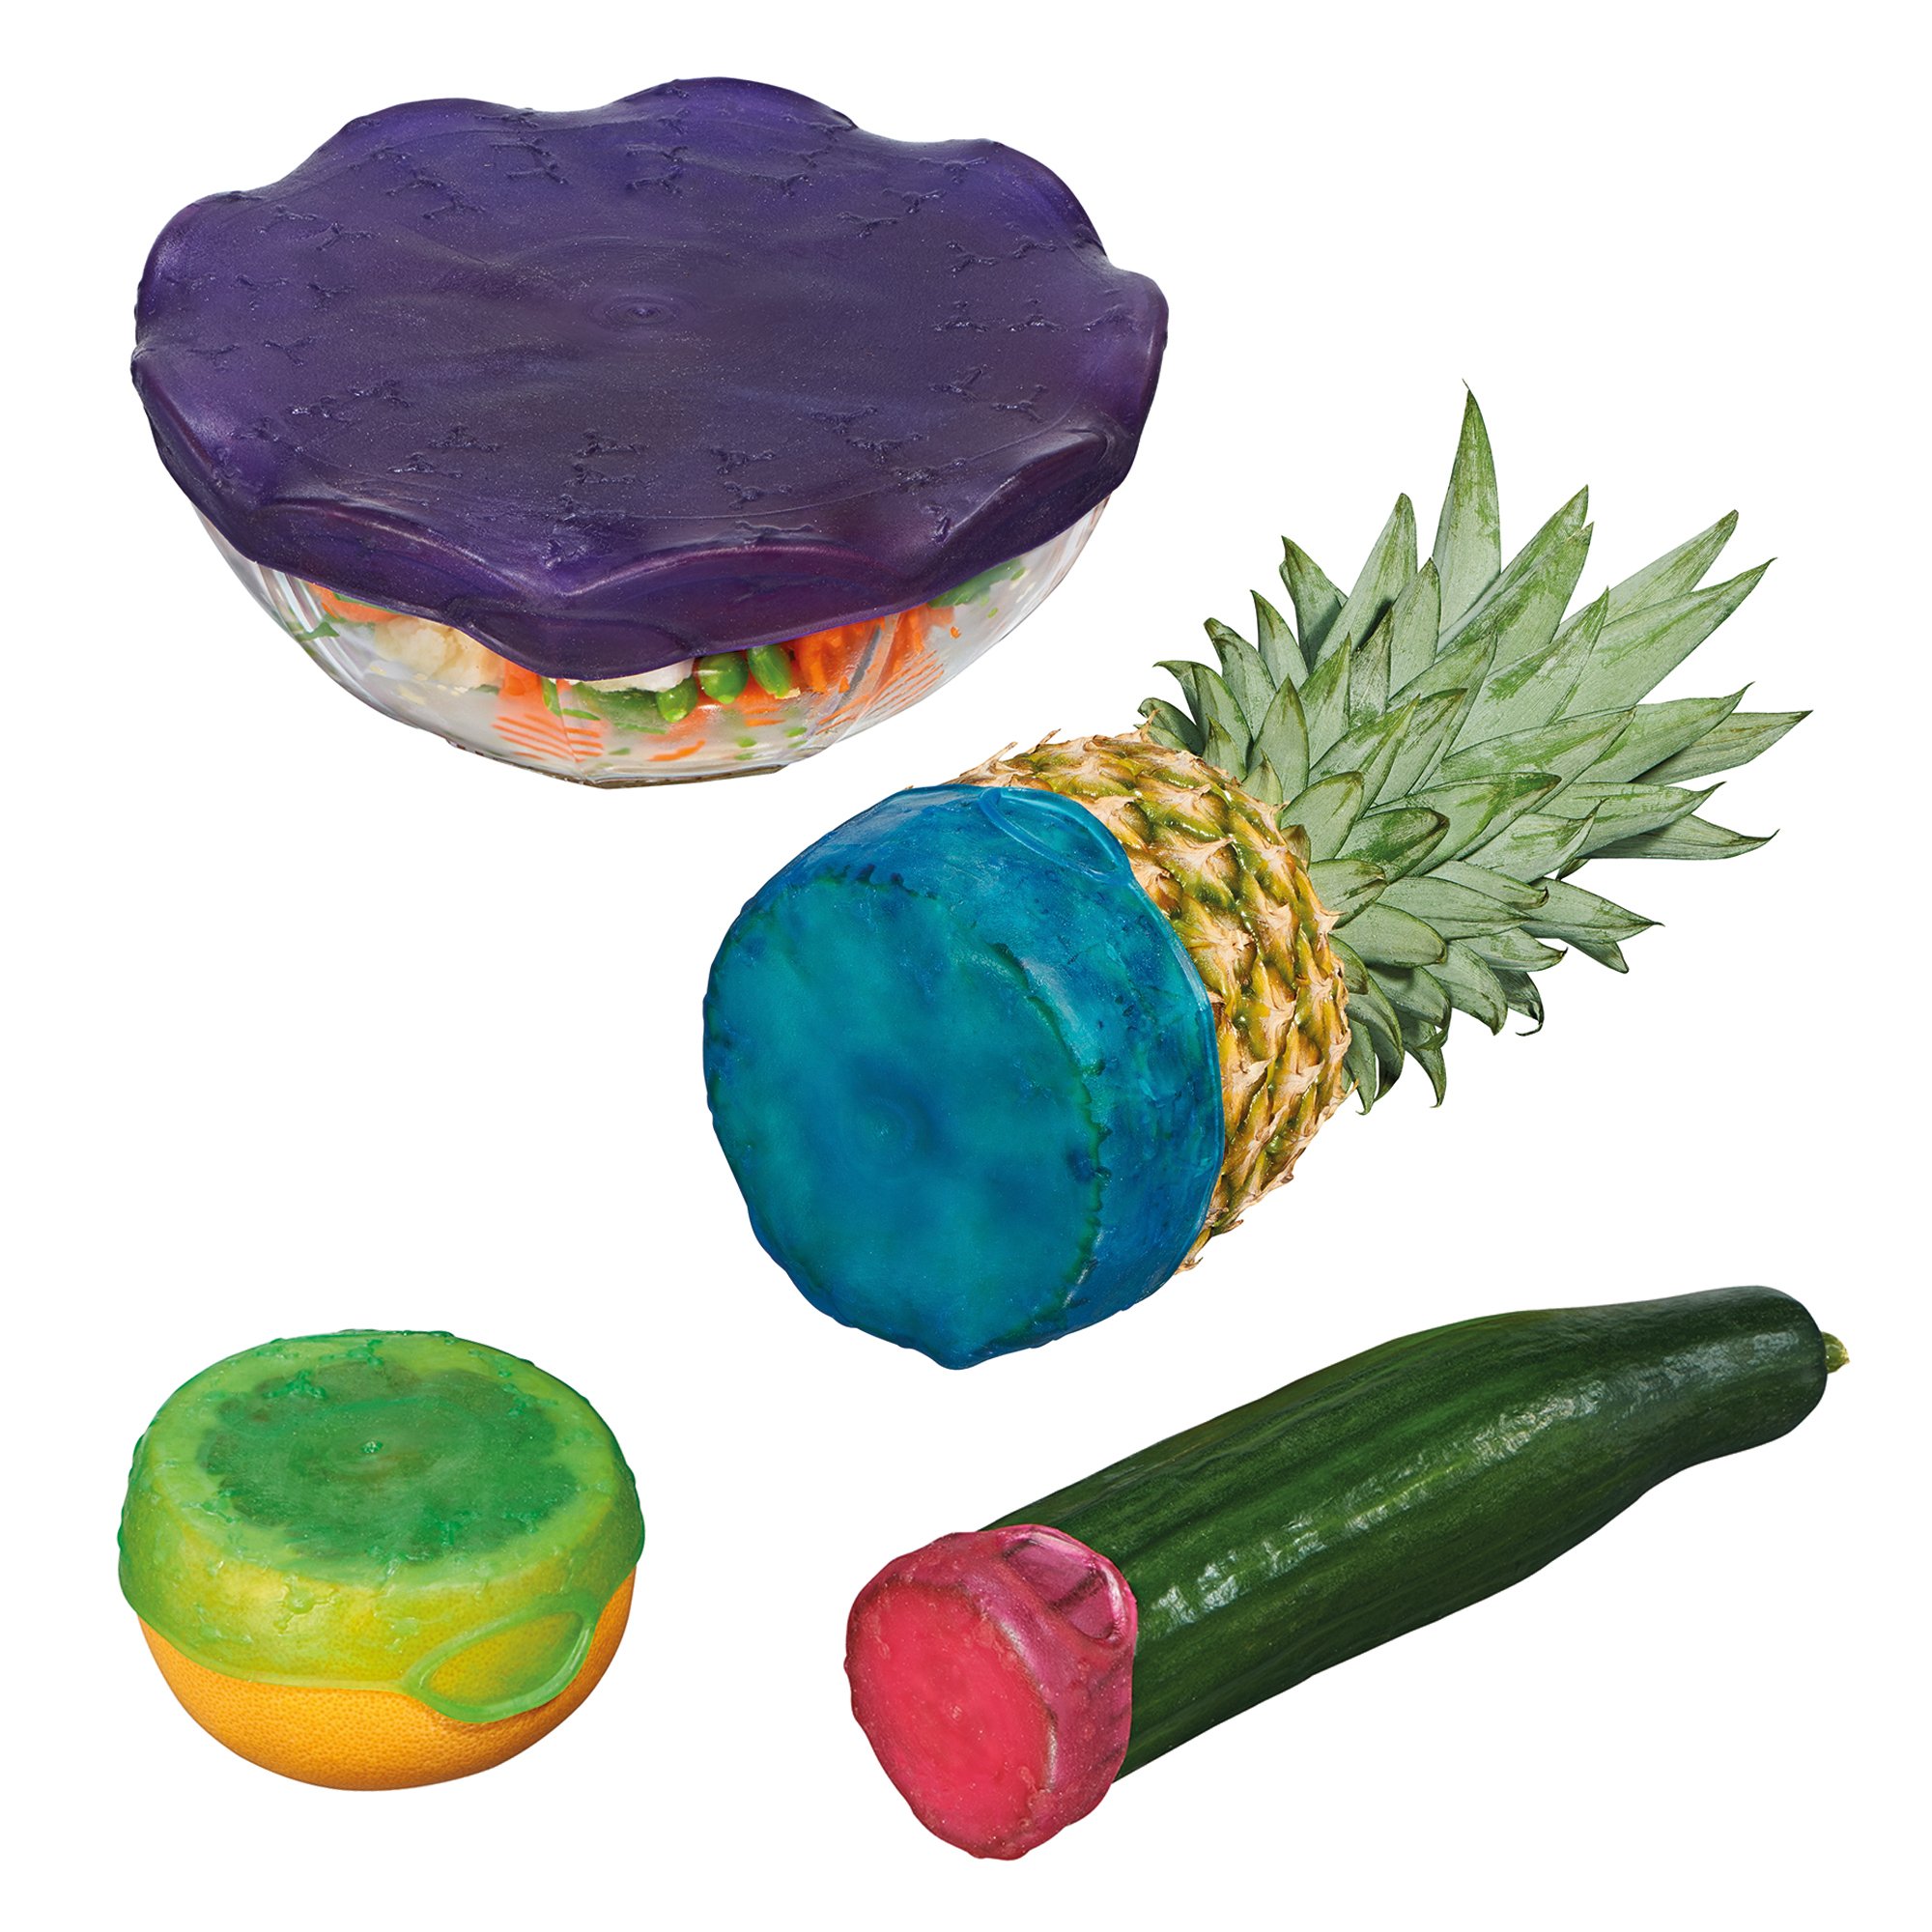 STONELINE® Freshness protection set for fruit and containers, 4 pcs.